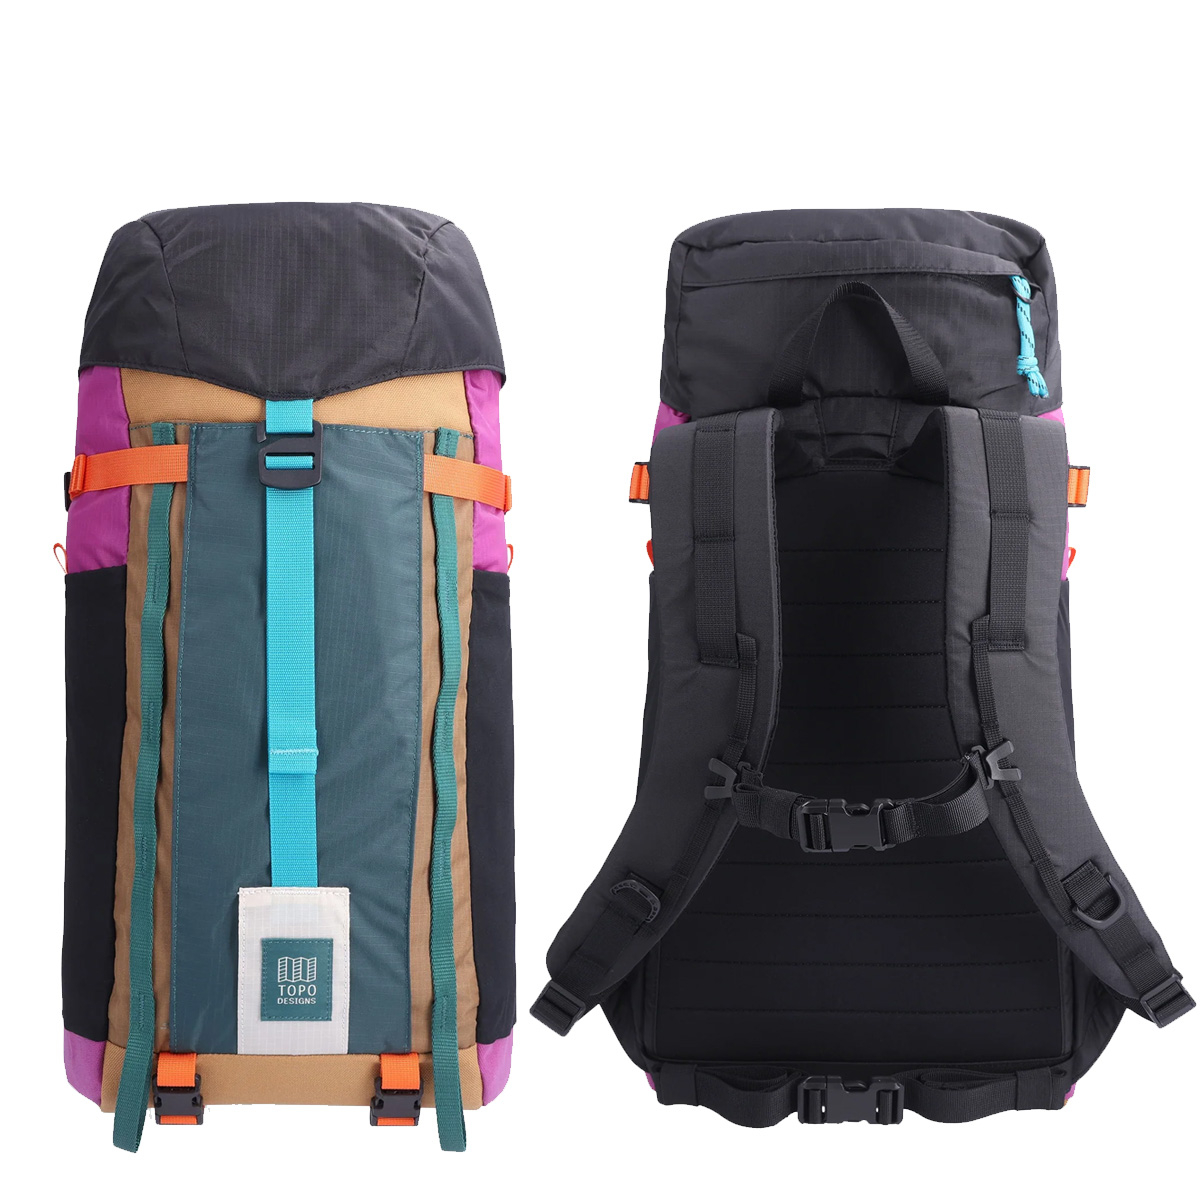 Topo Designs Mountain Pack 16L Botanic Green/Grape, front and back